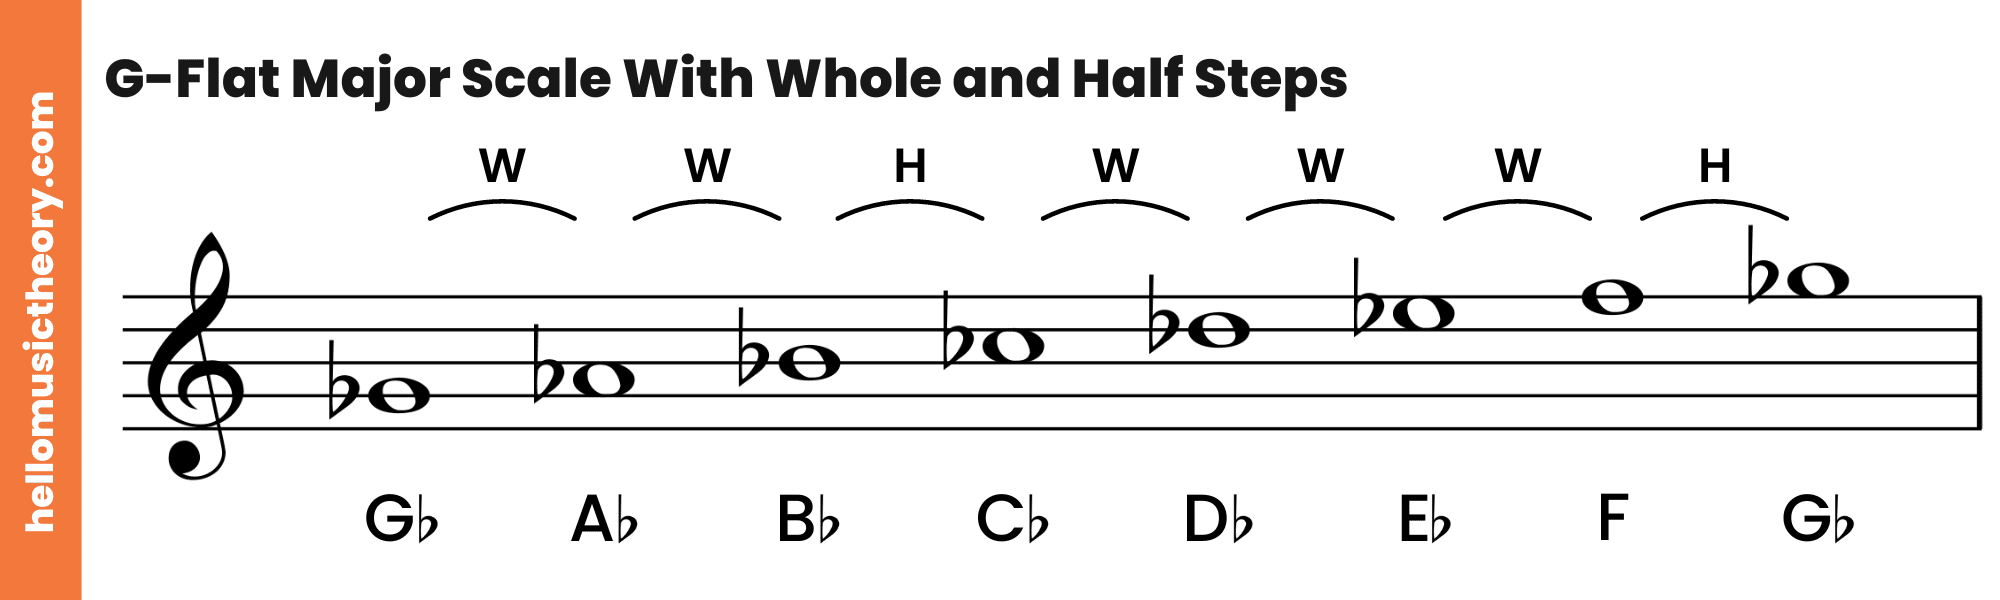 G-Flat Major Scale Treble Clef With Whole and Half Steps